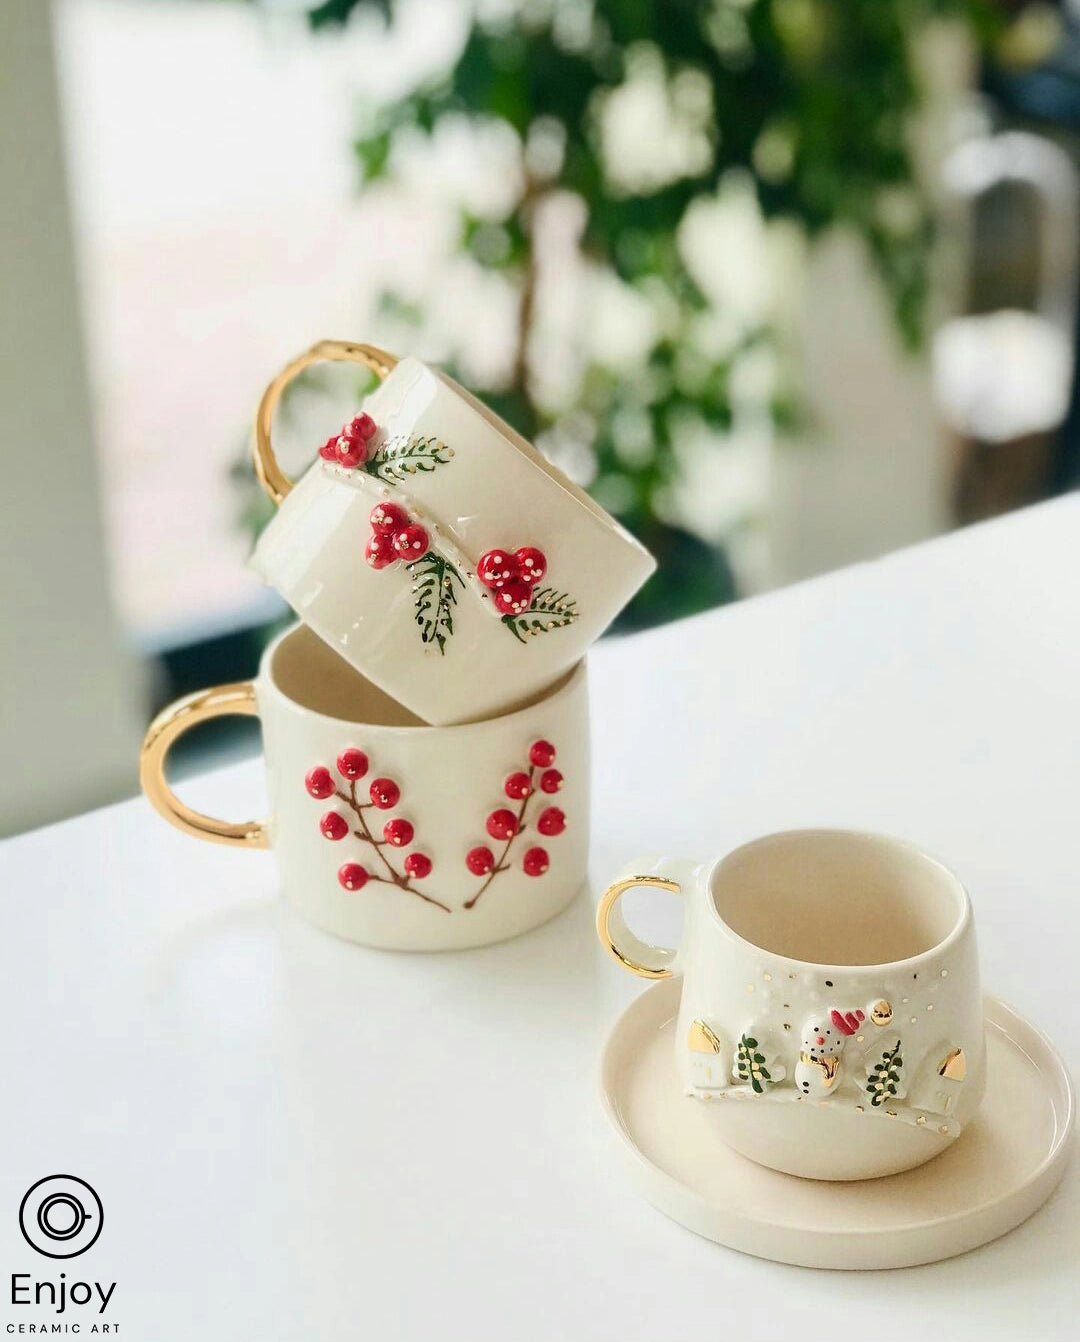 Handcrafted 'Frosty Charm' Snowman Ceramic Espresso Cup & Saucer Set - 5.4 oz - Perfect for Festive Coffee Lovers